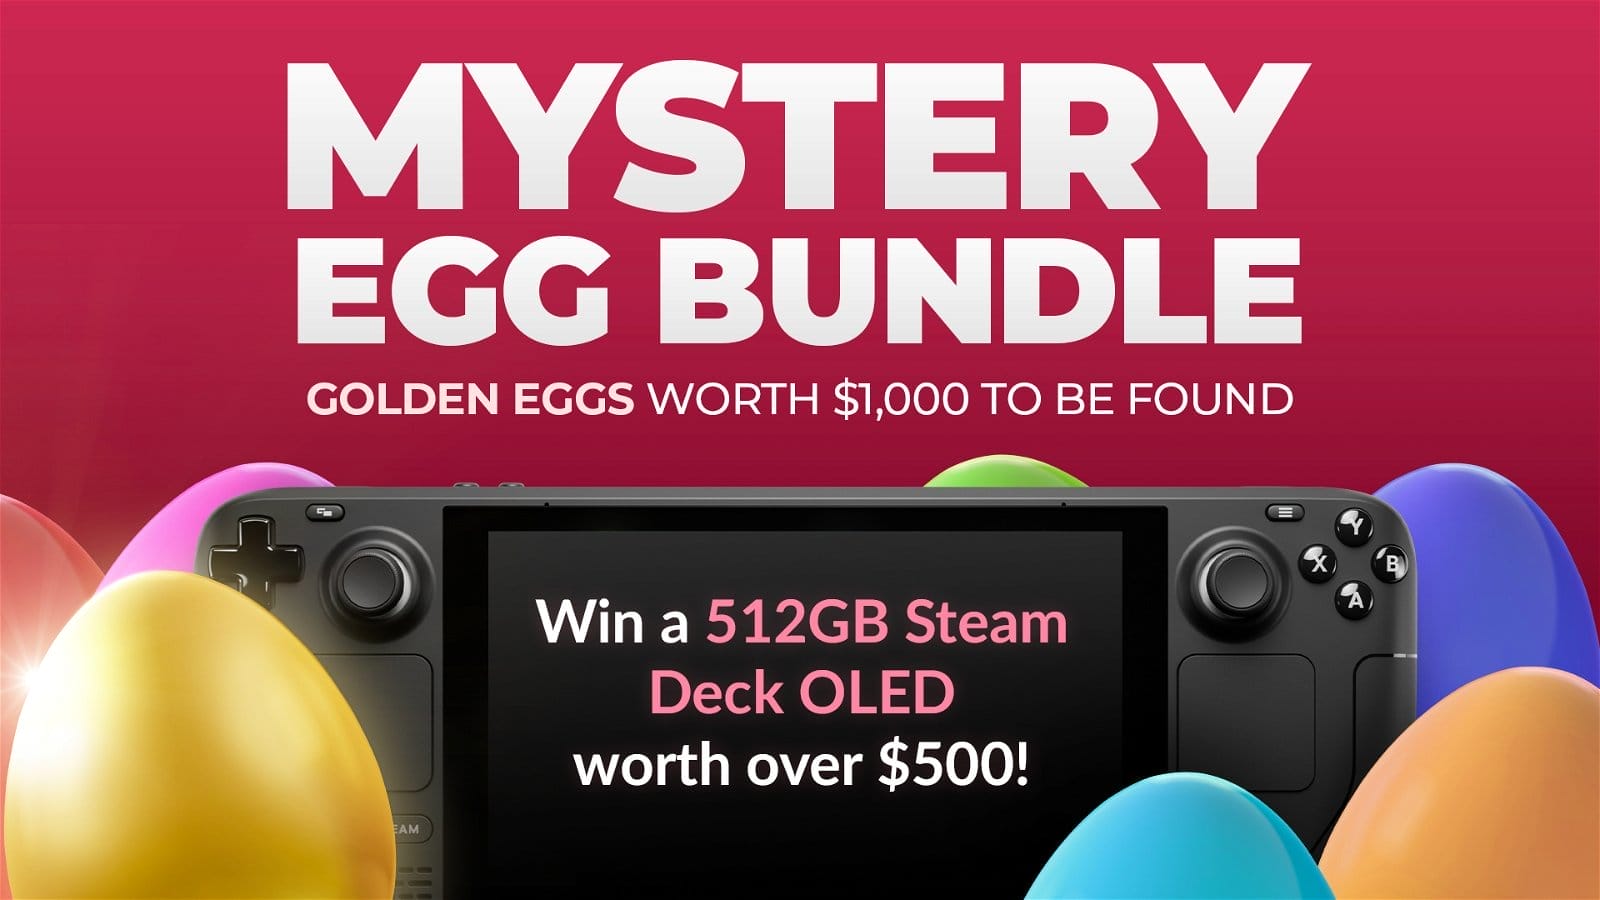 Mystery Egg Bundle: golden eggs worth \\$1,000 to be found. Plus - be in with the chance to win a 512GB Steam Deck OLED worth over \\$500!